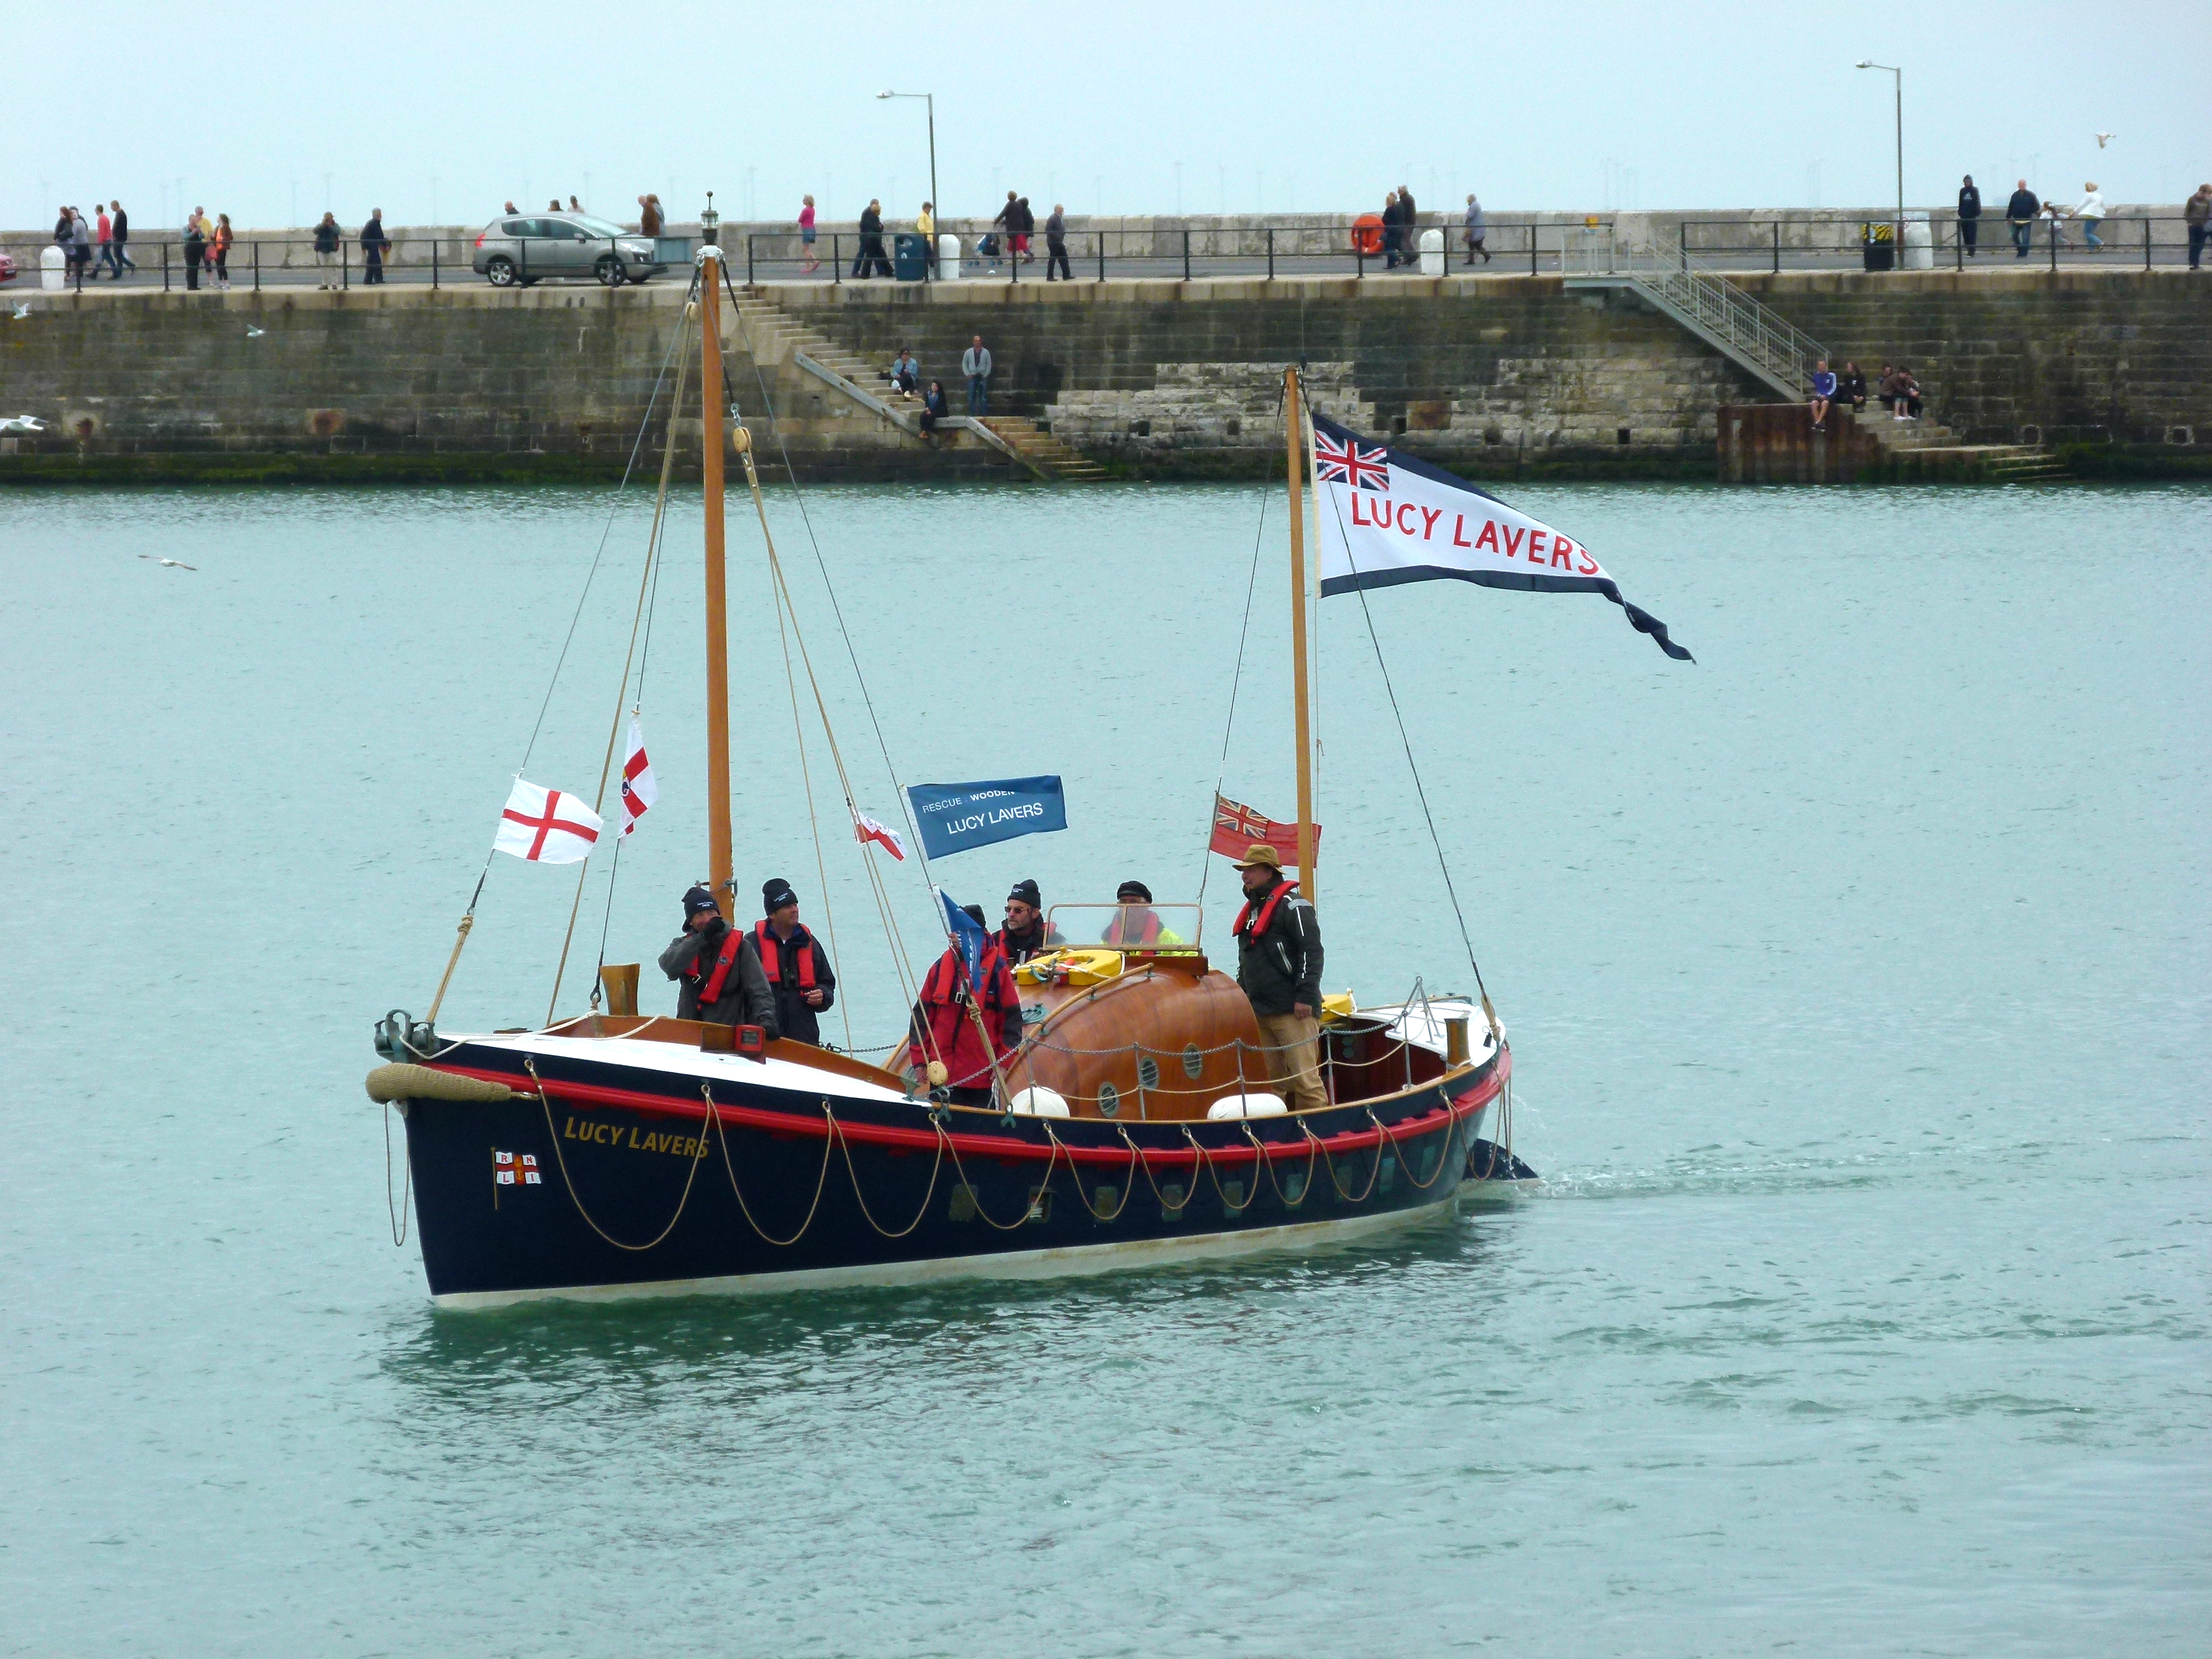 Lucy Lavers (c) Rescue Wooden Boats